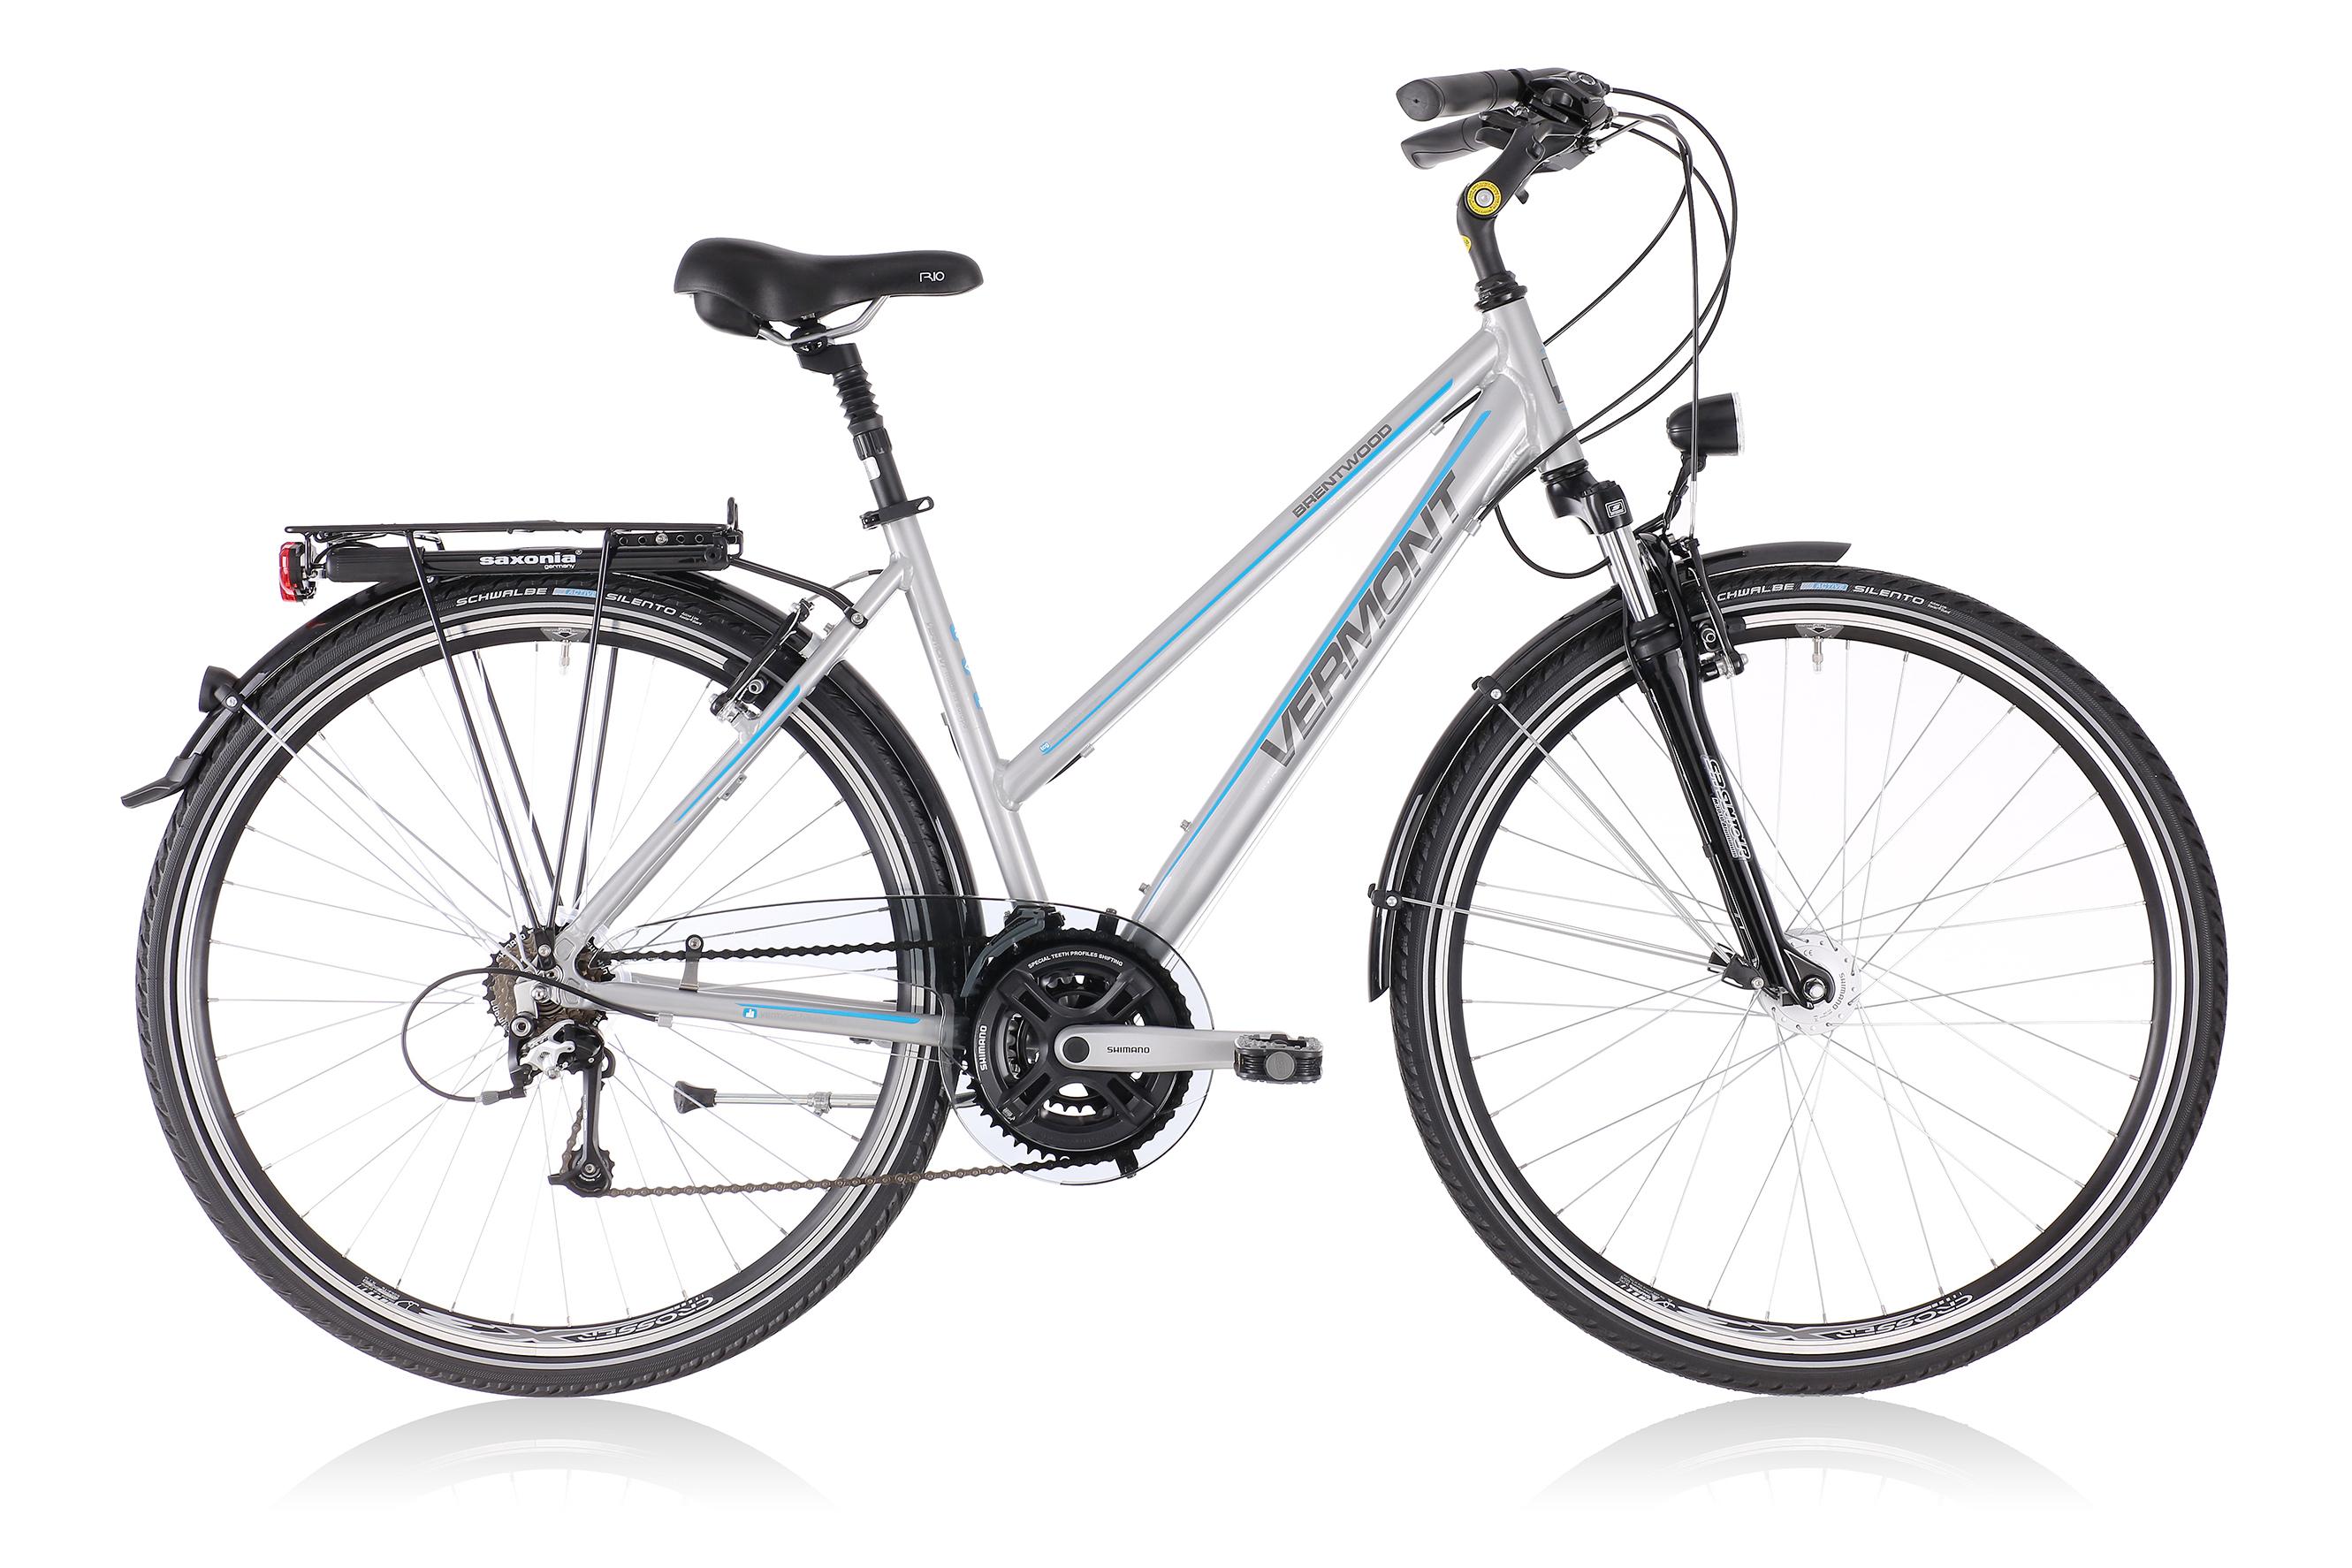 Foto Bicicleta Vermont Brentwood Lady, silver gris para mujer , 48 cm